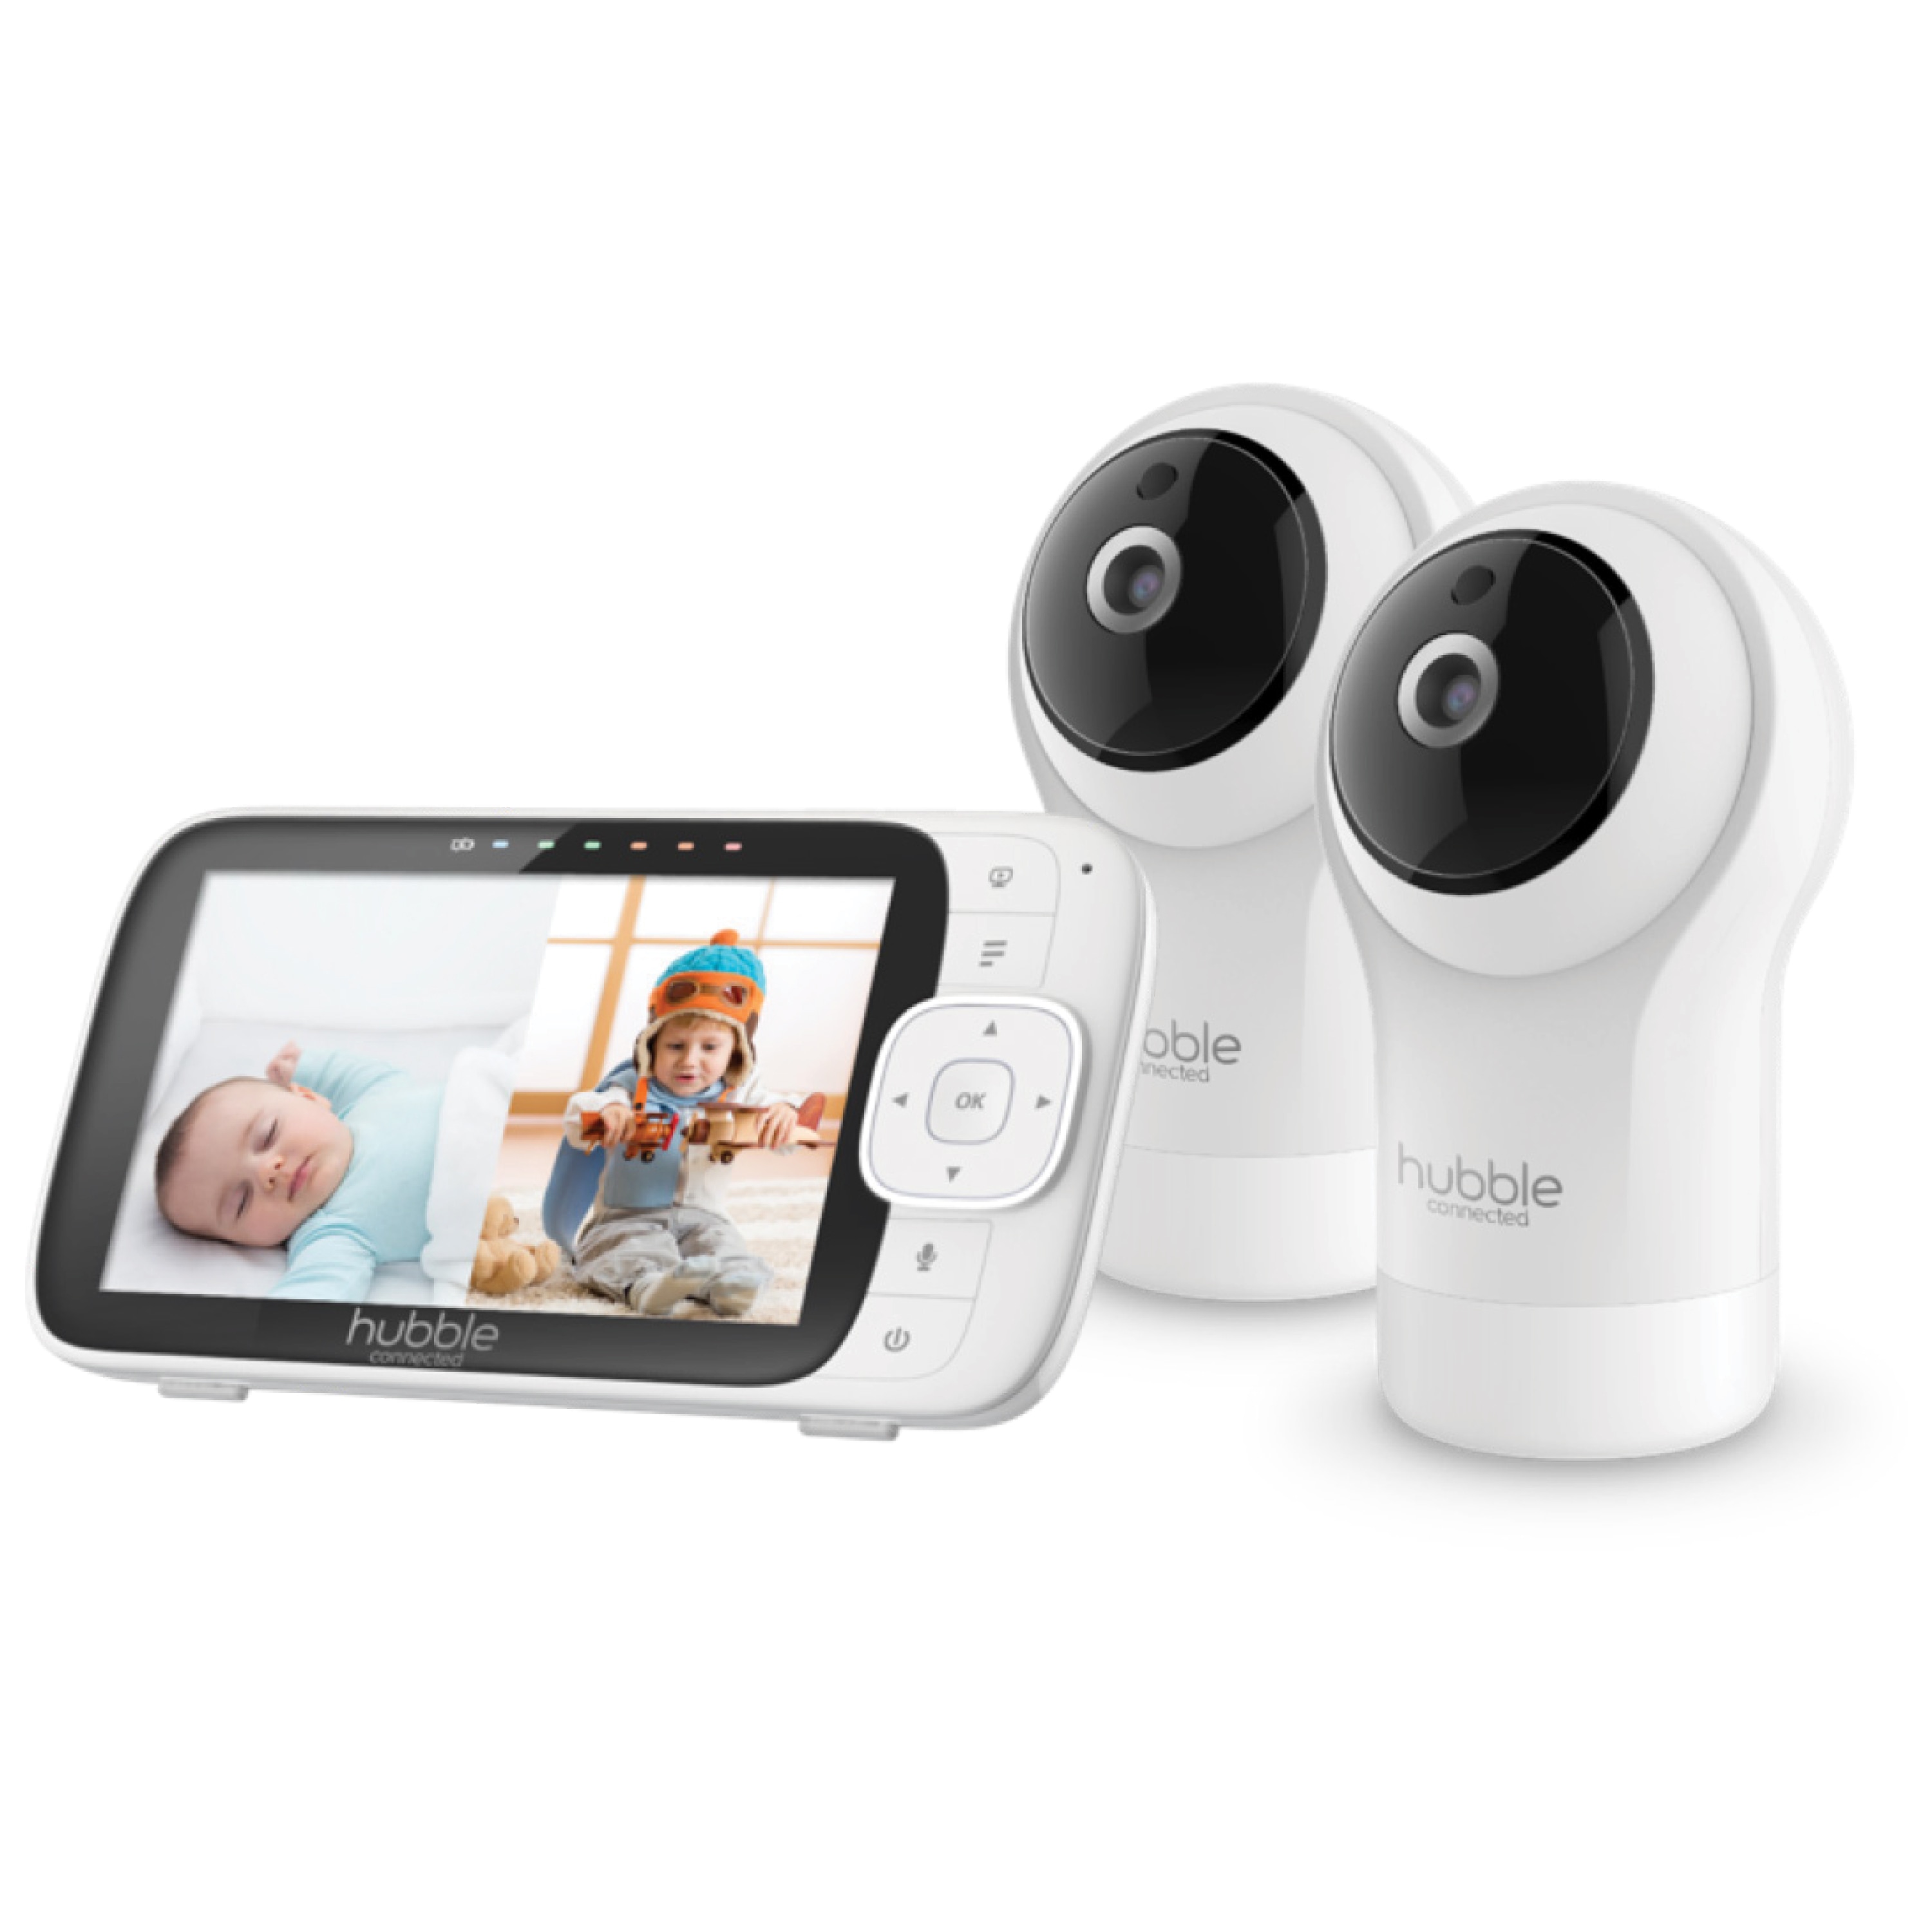 MOTOROLA MBP36XL 5in Portable Video Baby Monitor in the Baby Monitors &  Cameras department at